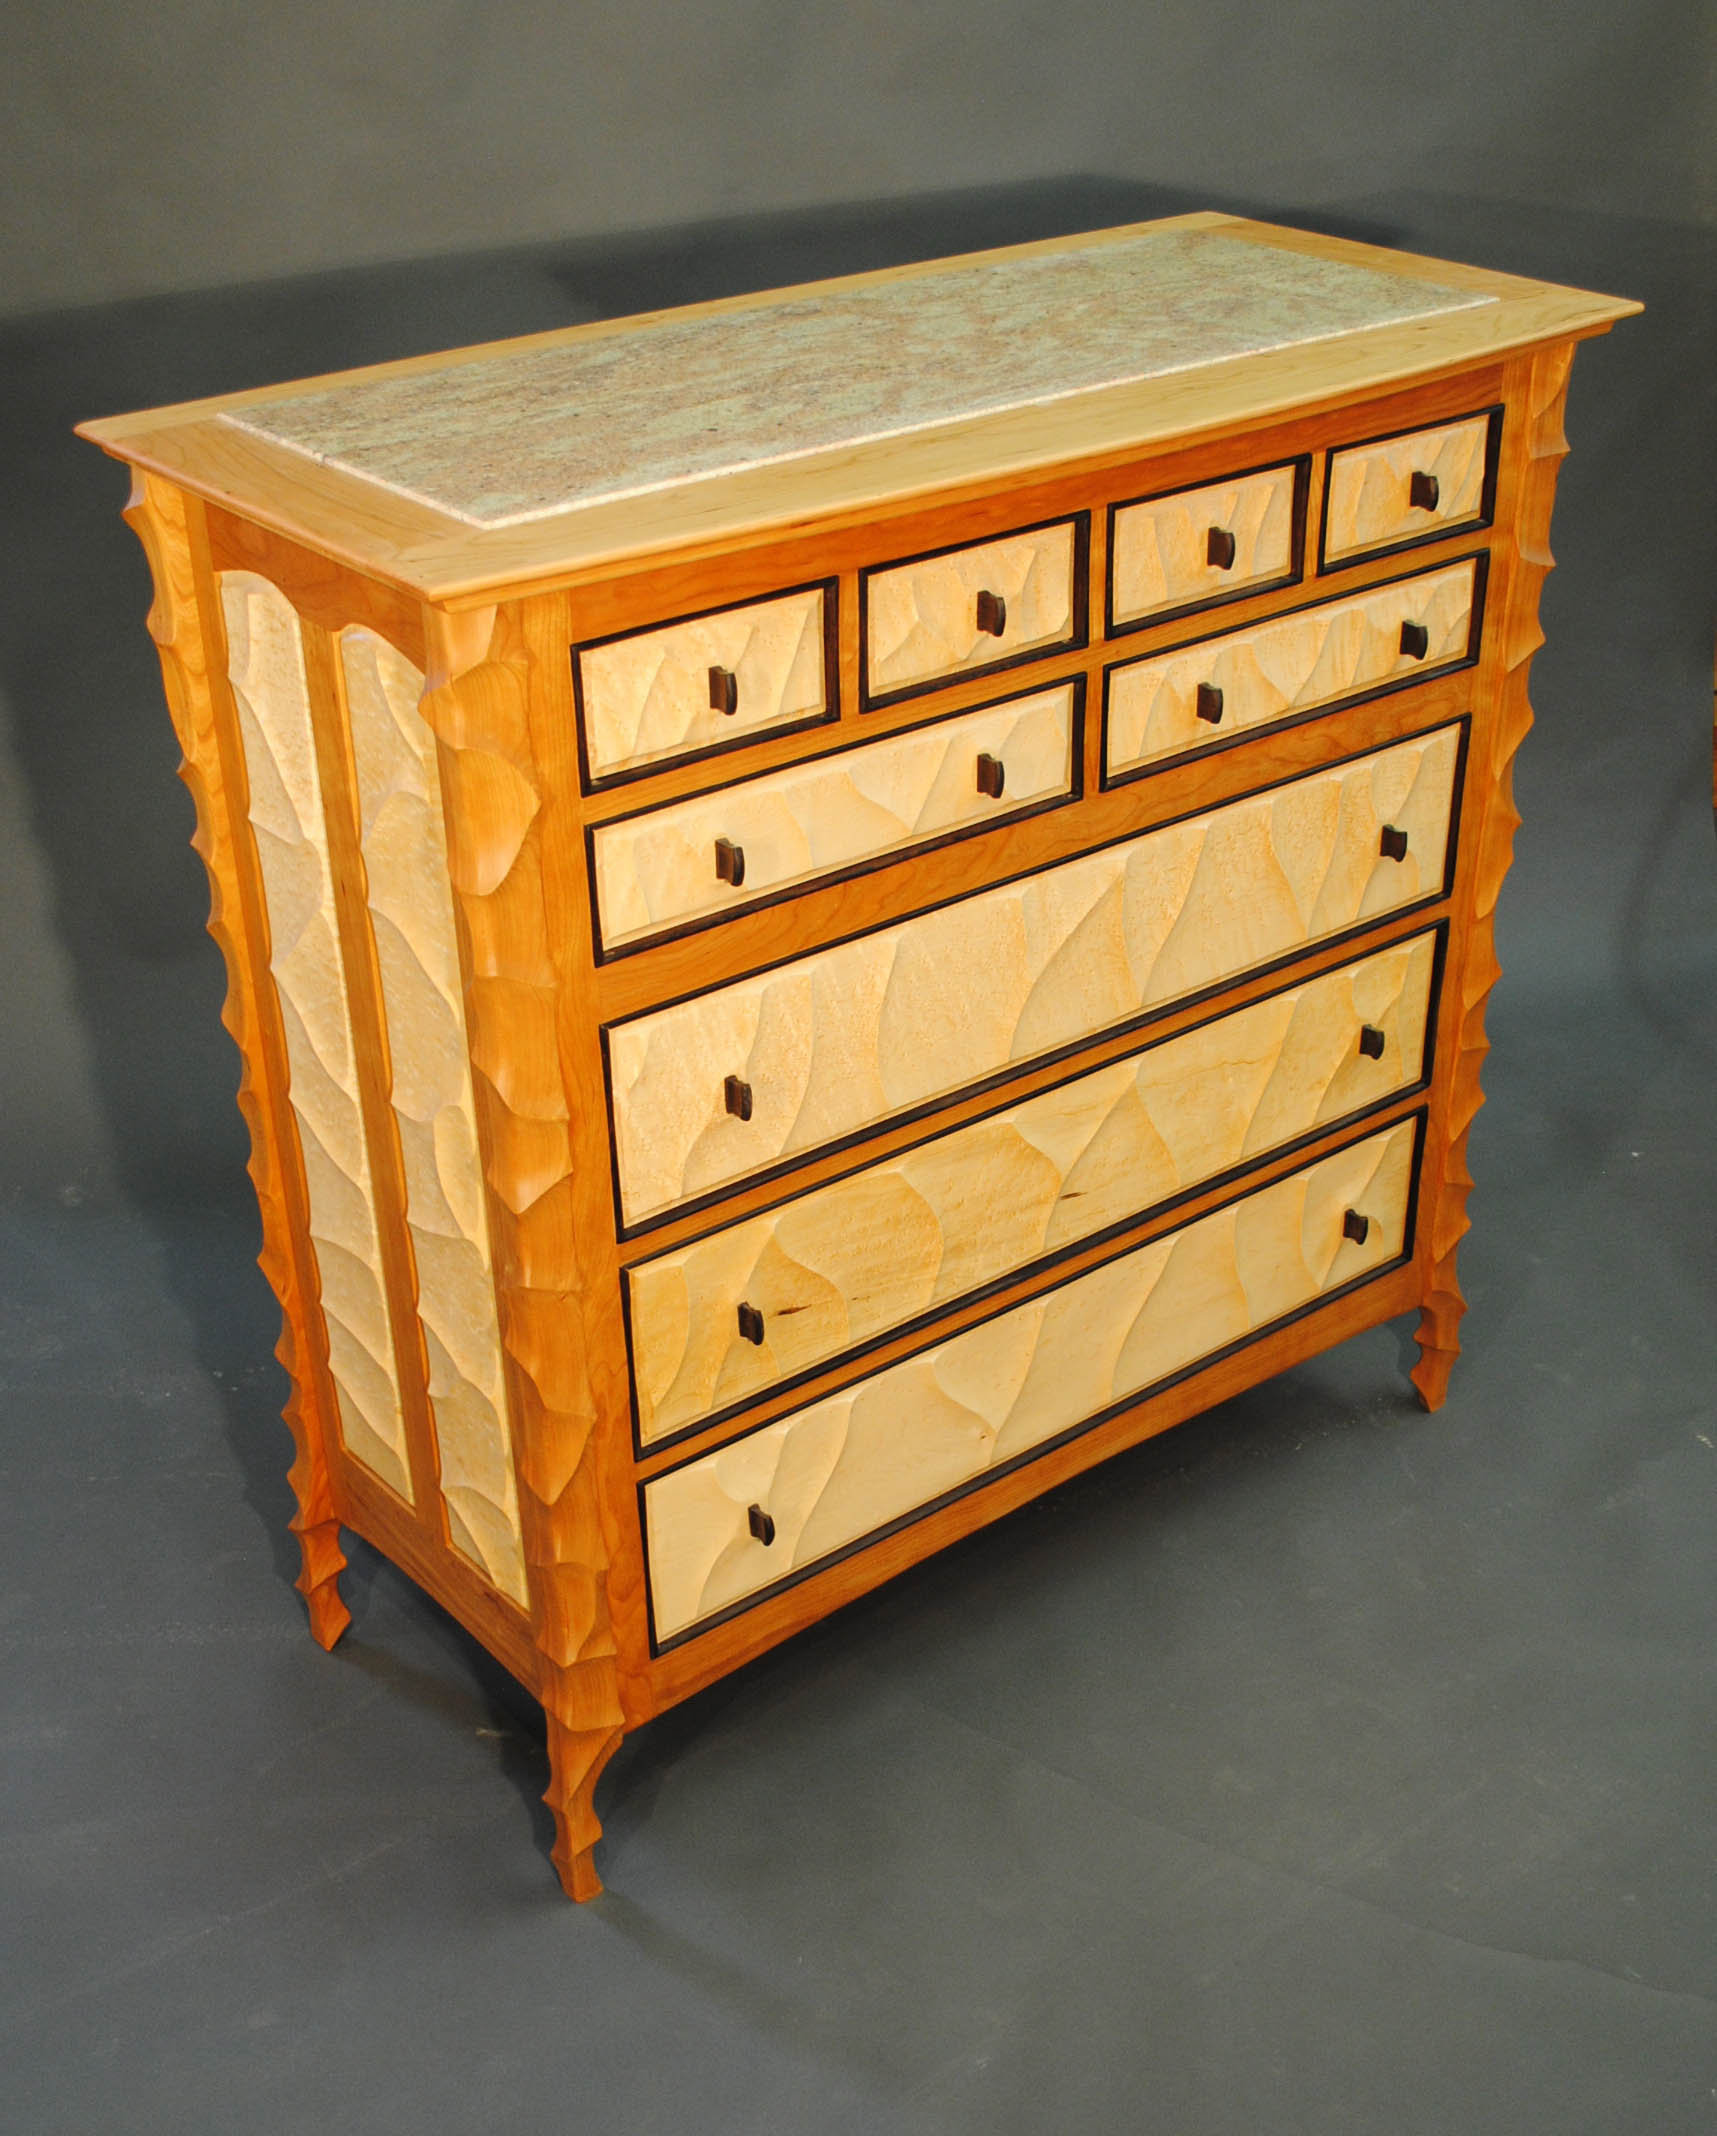 Sculpted Cherry And Granite Dresser By John Wesley Williams Wood